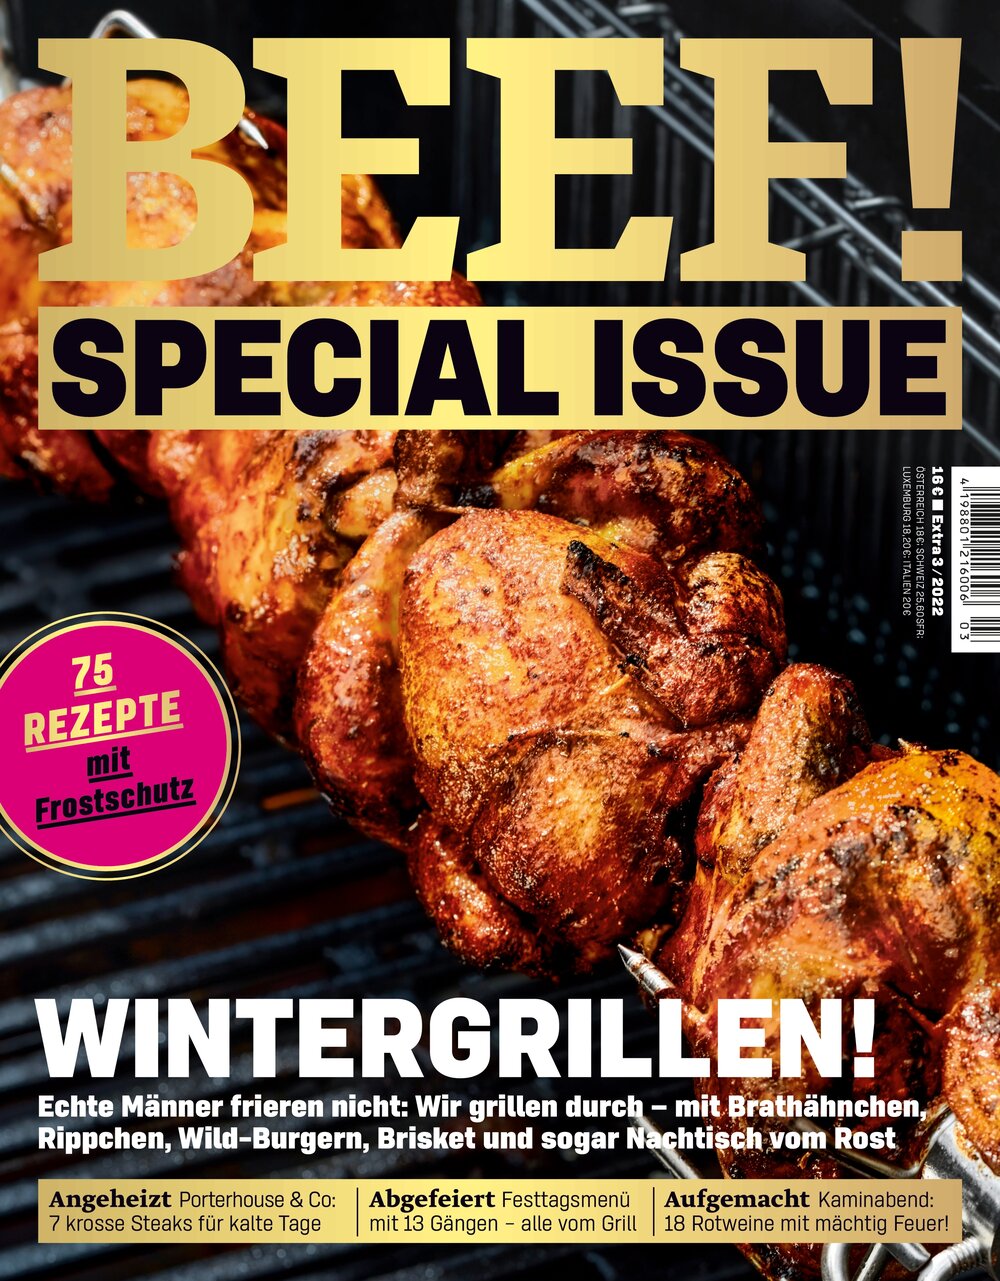 BEEF! Special Issue ePaper 03/2022